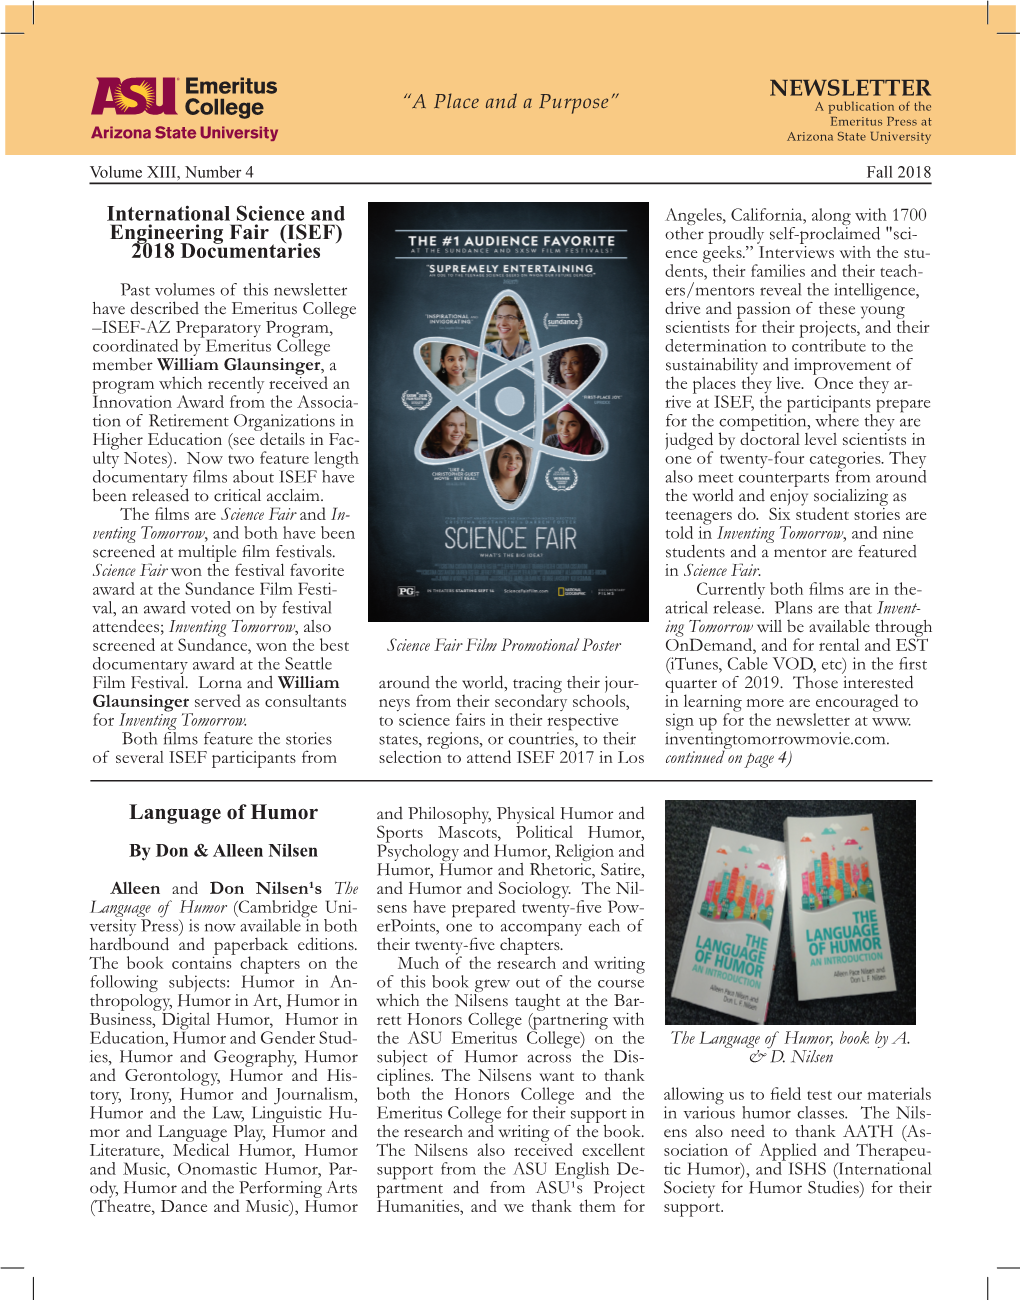 NEWSLETTER “A Place and a Purpose” a Publication of the Emeritus Press at Arizona State University